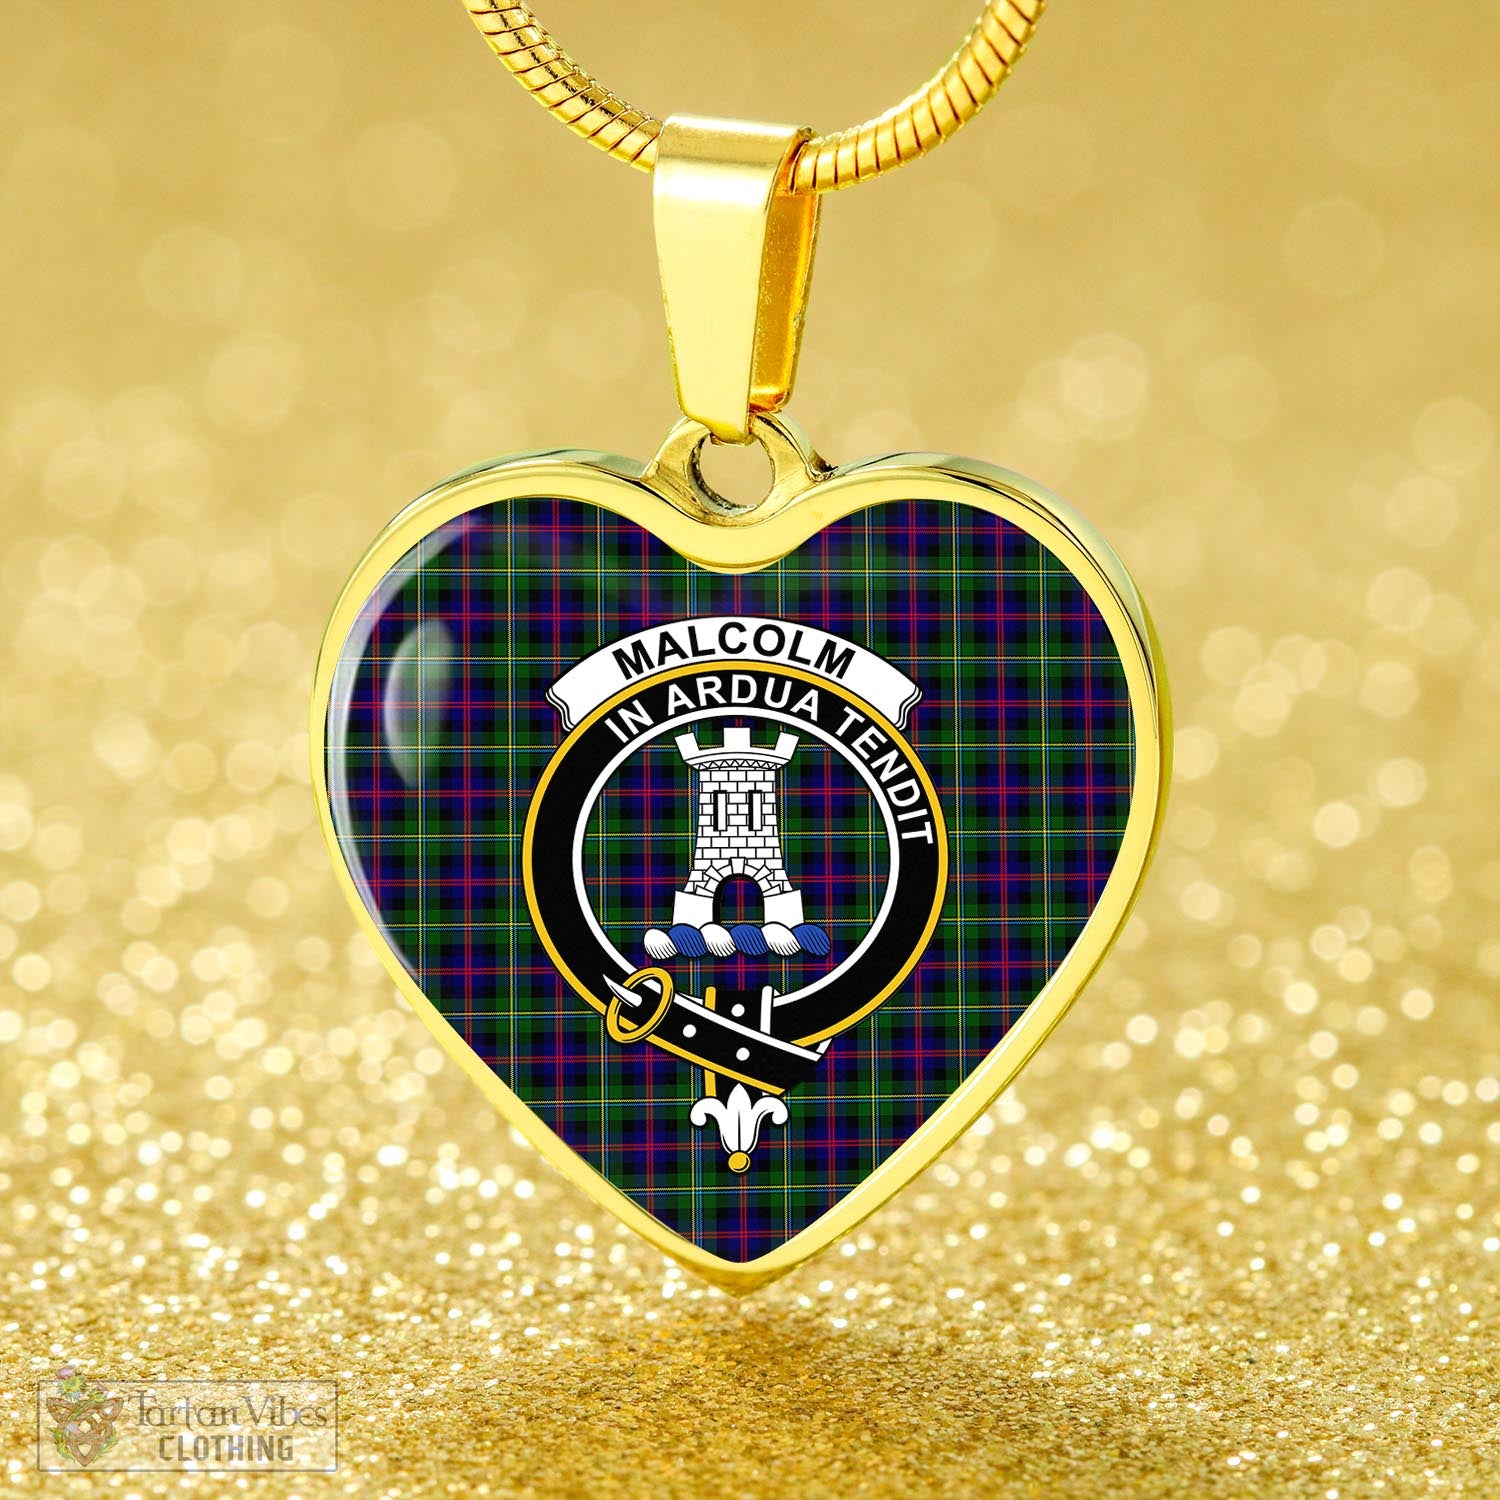 Tartan Vibes Clothing Malcolm Tartan Heart Necklace with Family Crest